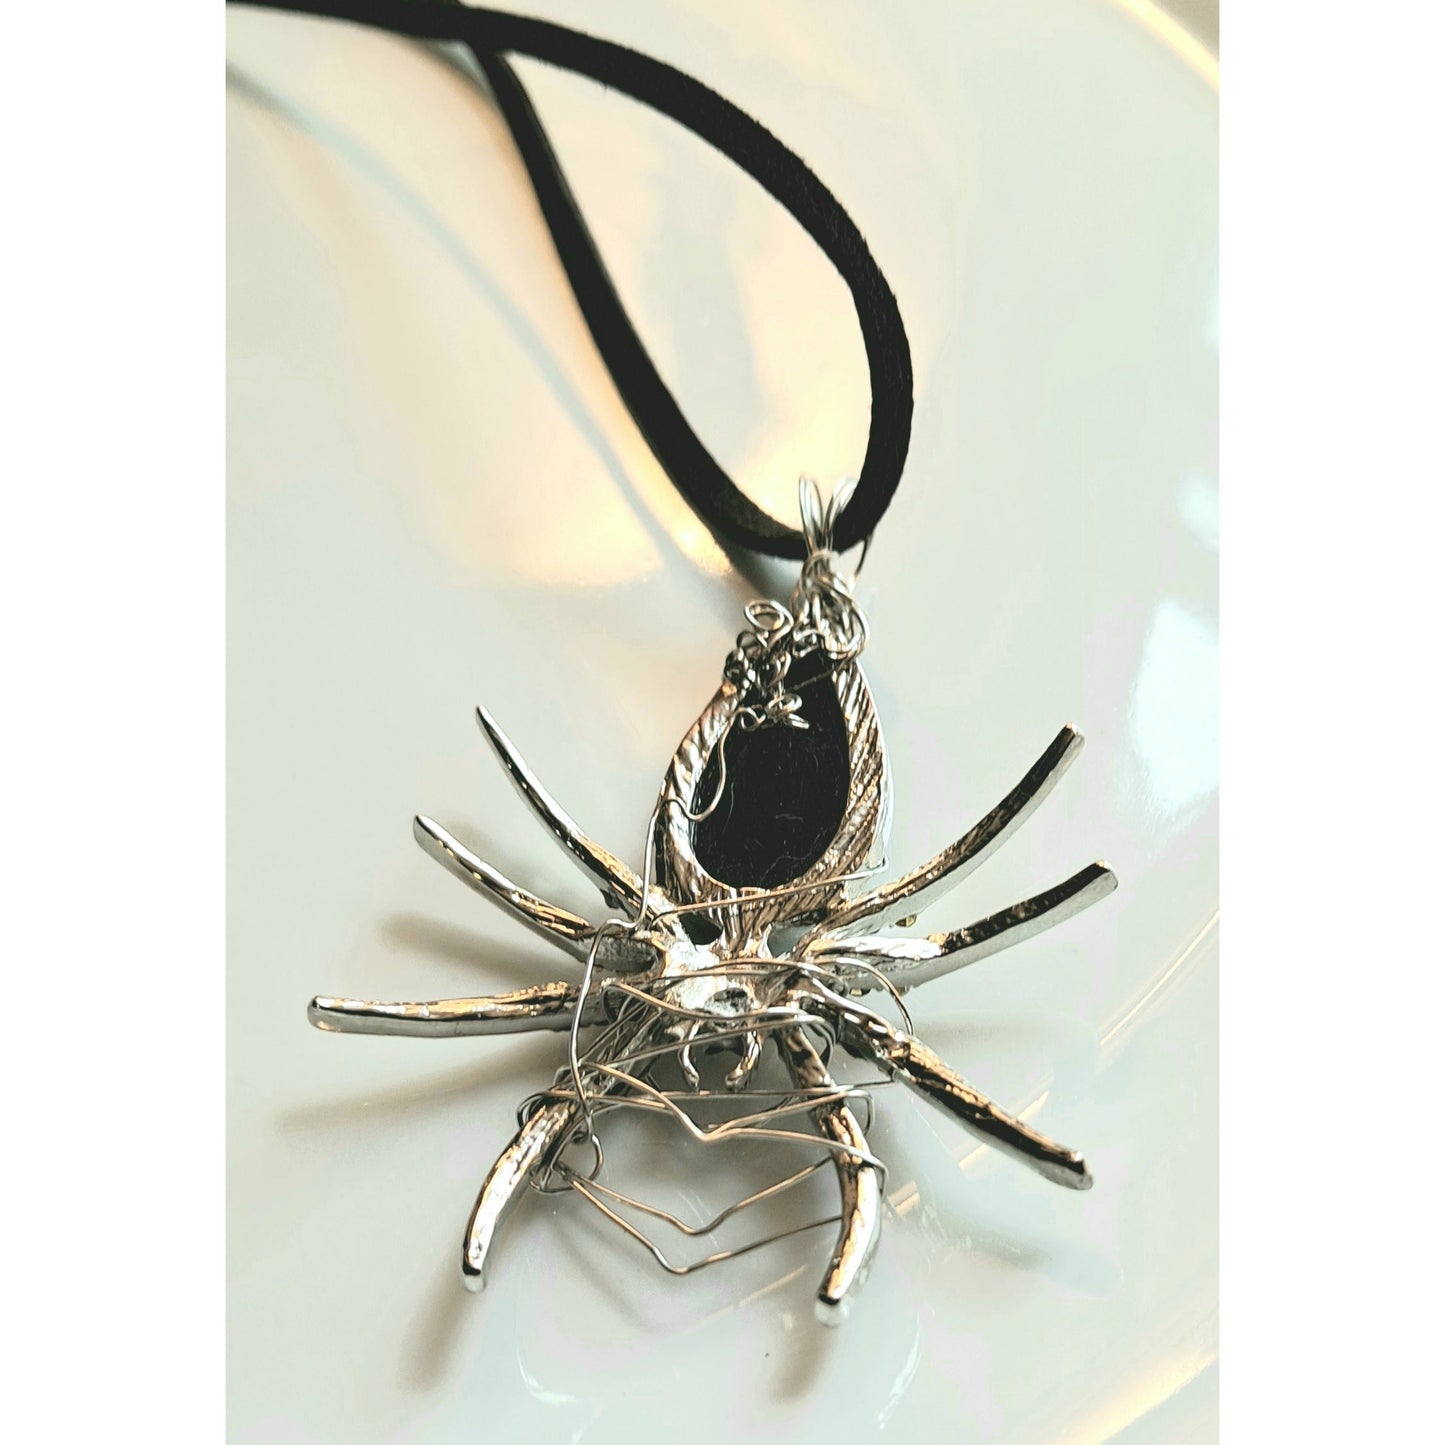 Charolotte the Spider necklace, Halloween Necklace